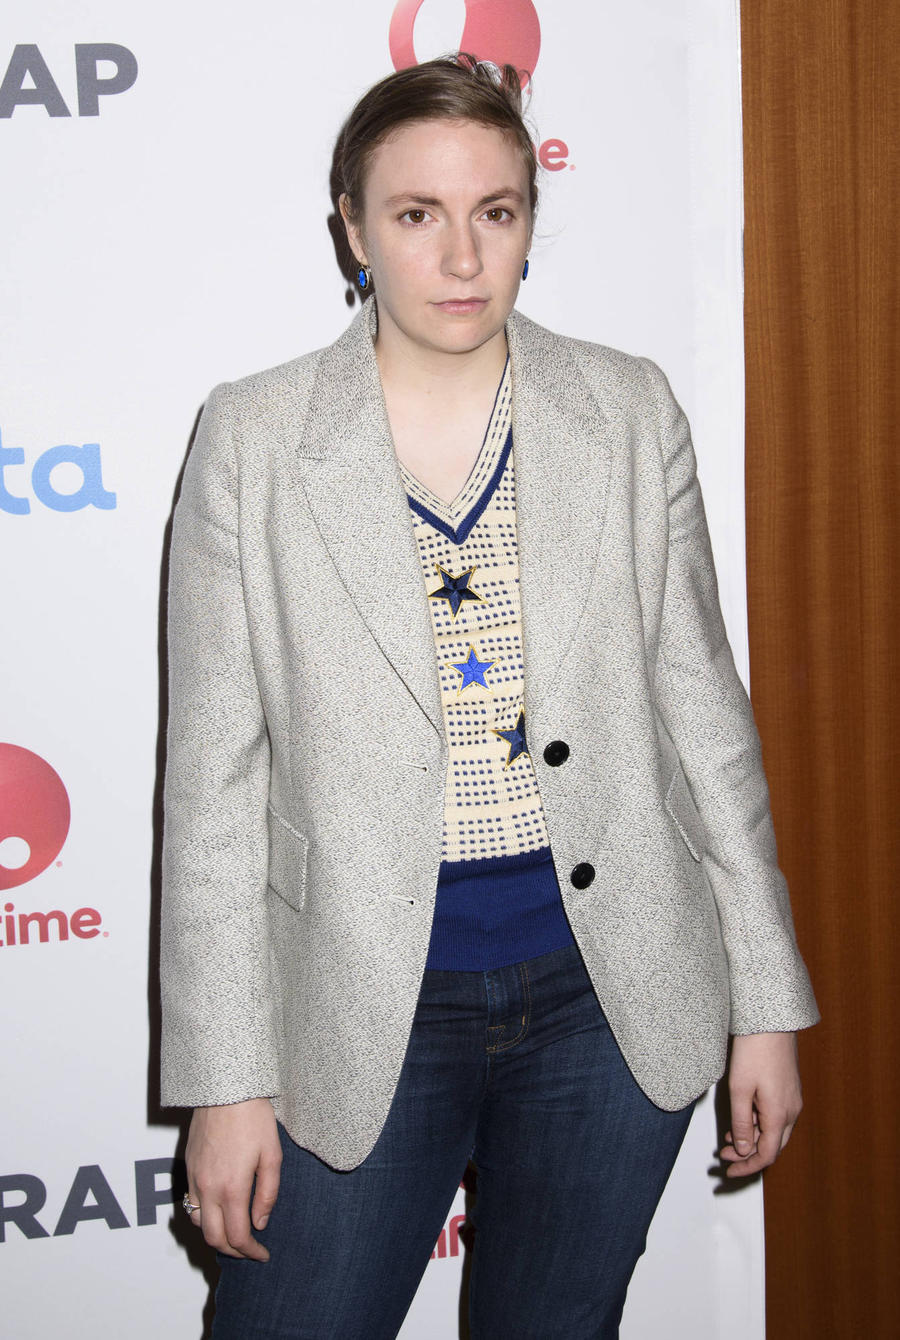 Lena Dunham Suffered With Hives After Trump's Election 